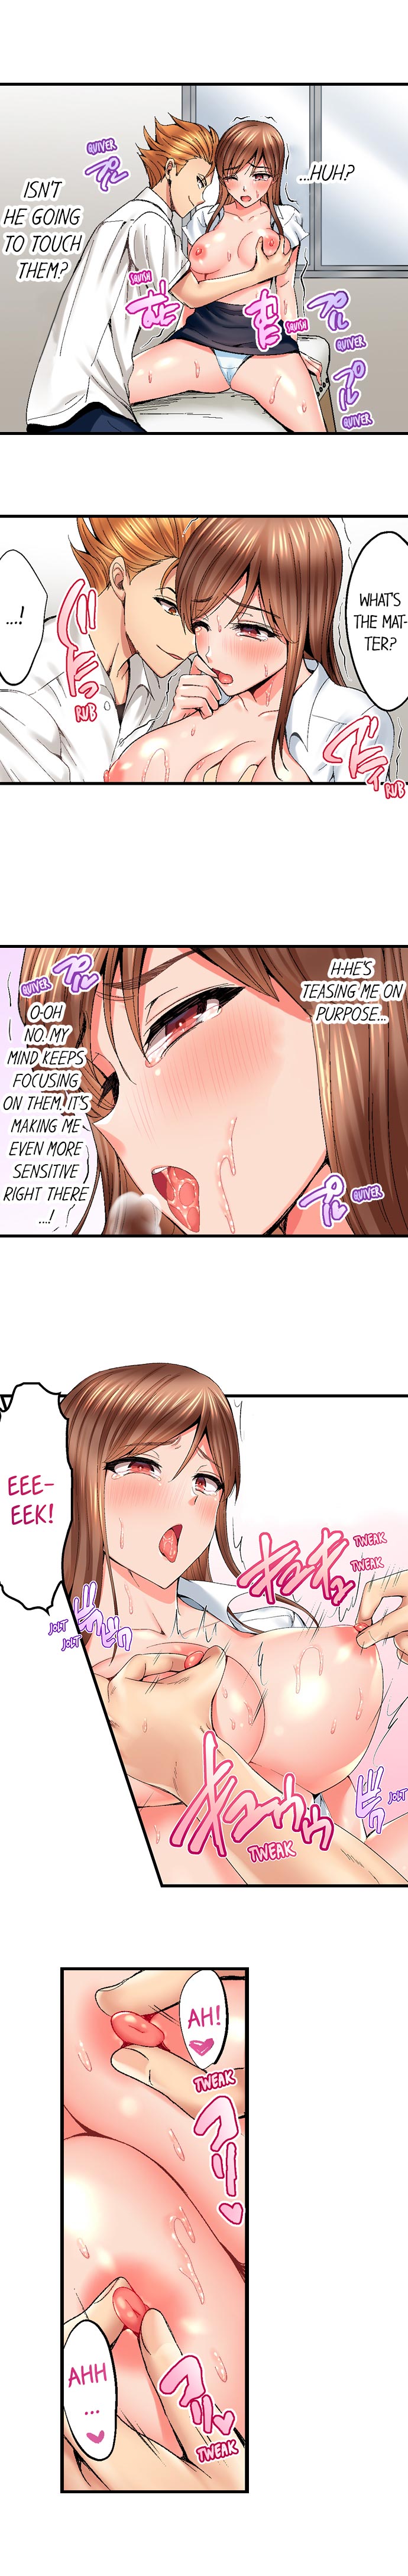 Netorare My Teacher With My Friends - Chapter 5 Page 3